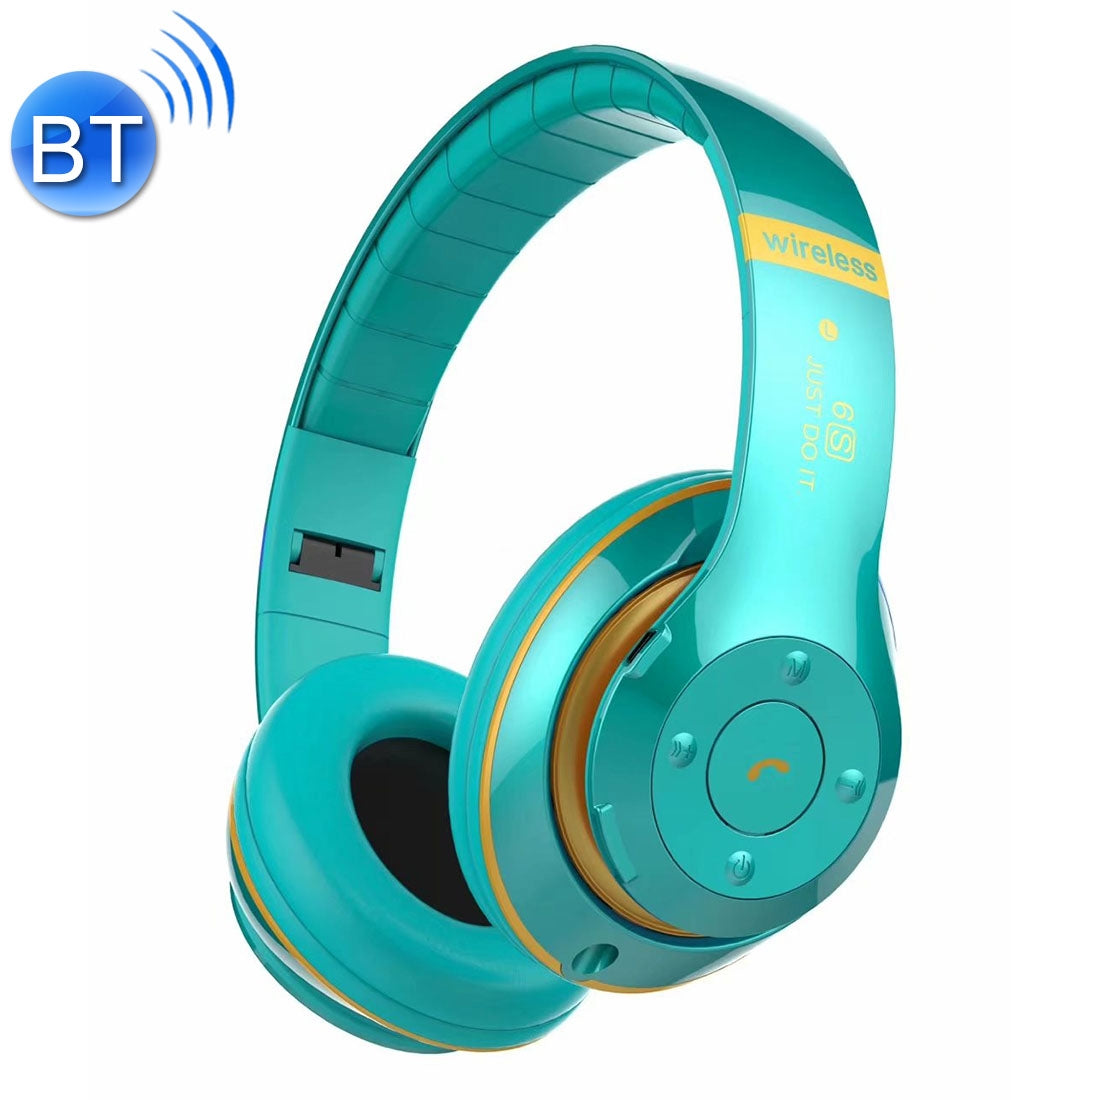 V30 Wireless Bluetooth 4.2 Headphone with Mic & FM & TF Card & Handfree Function, For iPhone, iPad, iPod, Samsung, HTC, Sony, Huawei, Xiaomi and other Audio Devices(Blue)